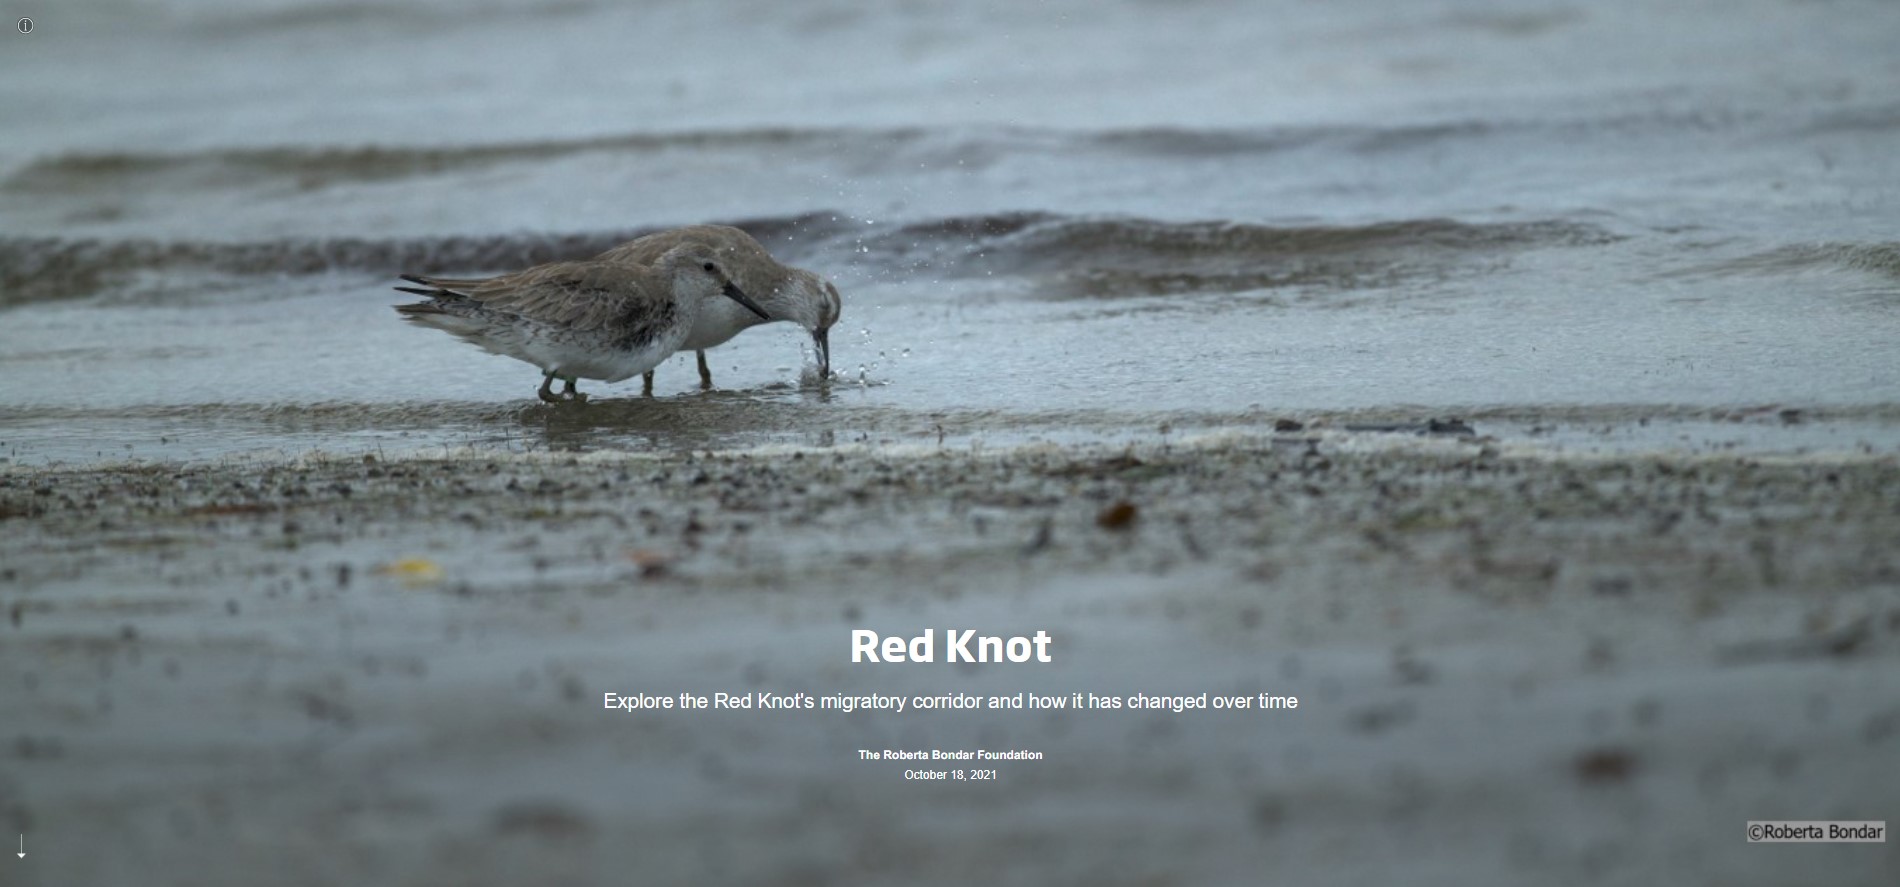 Slide with the text Red Knot and a photo of two birds on a sandy beach with waves in background